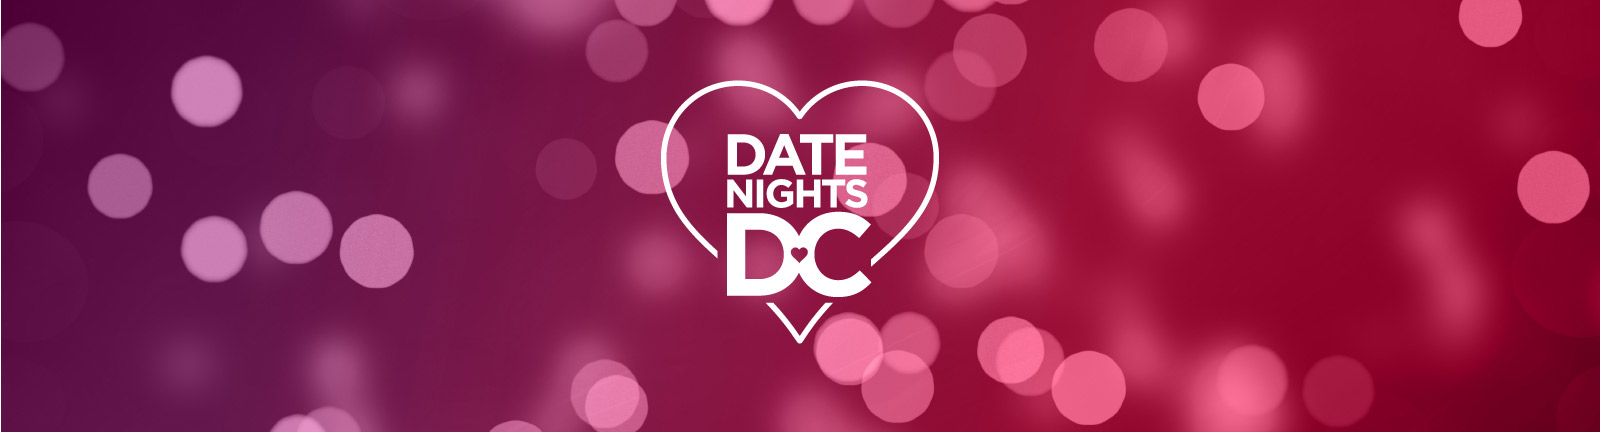 Date Nights DC - Your ultimate guide to romance in Washington, DC